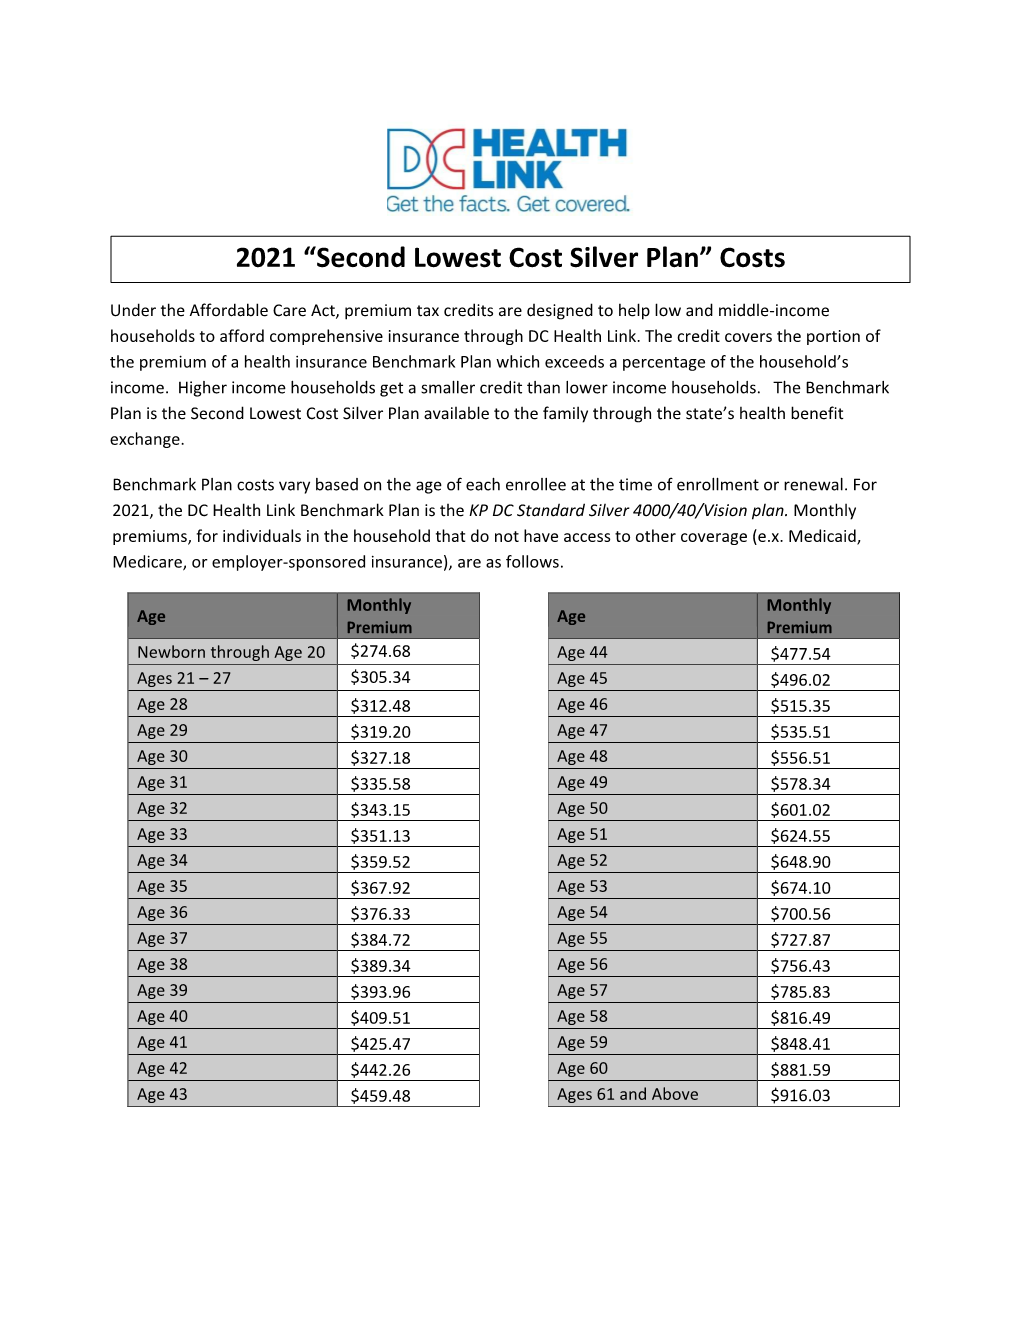 2021 “Second Lowest Cost Silver Plan” Costs